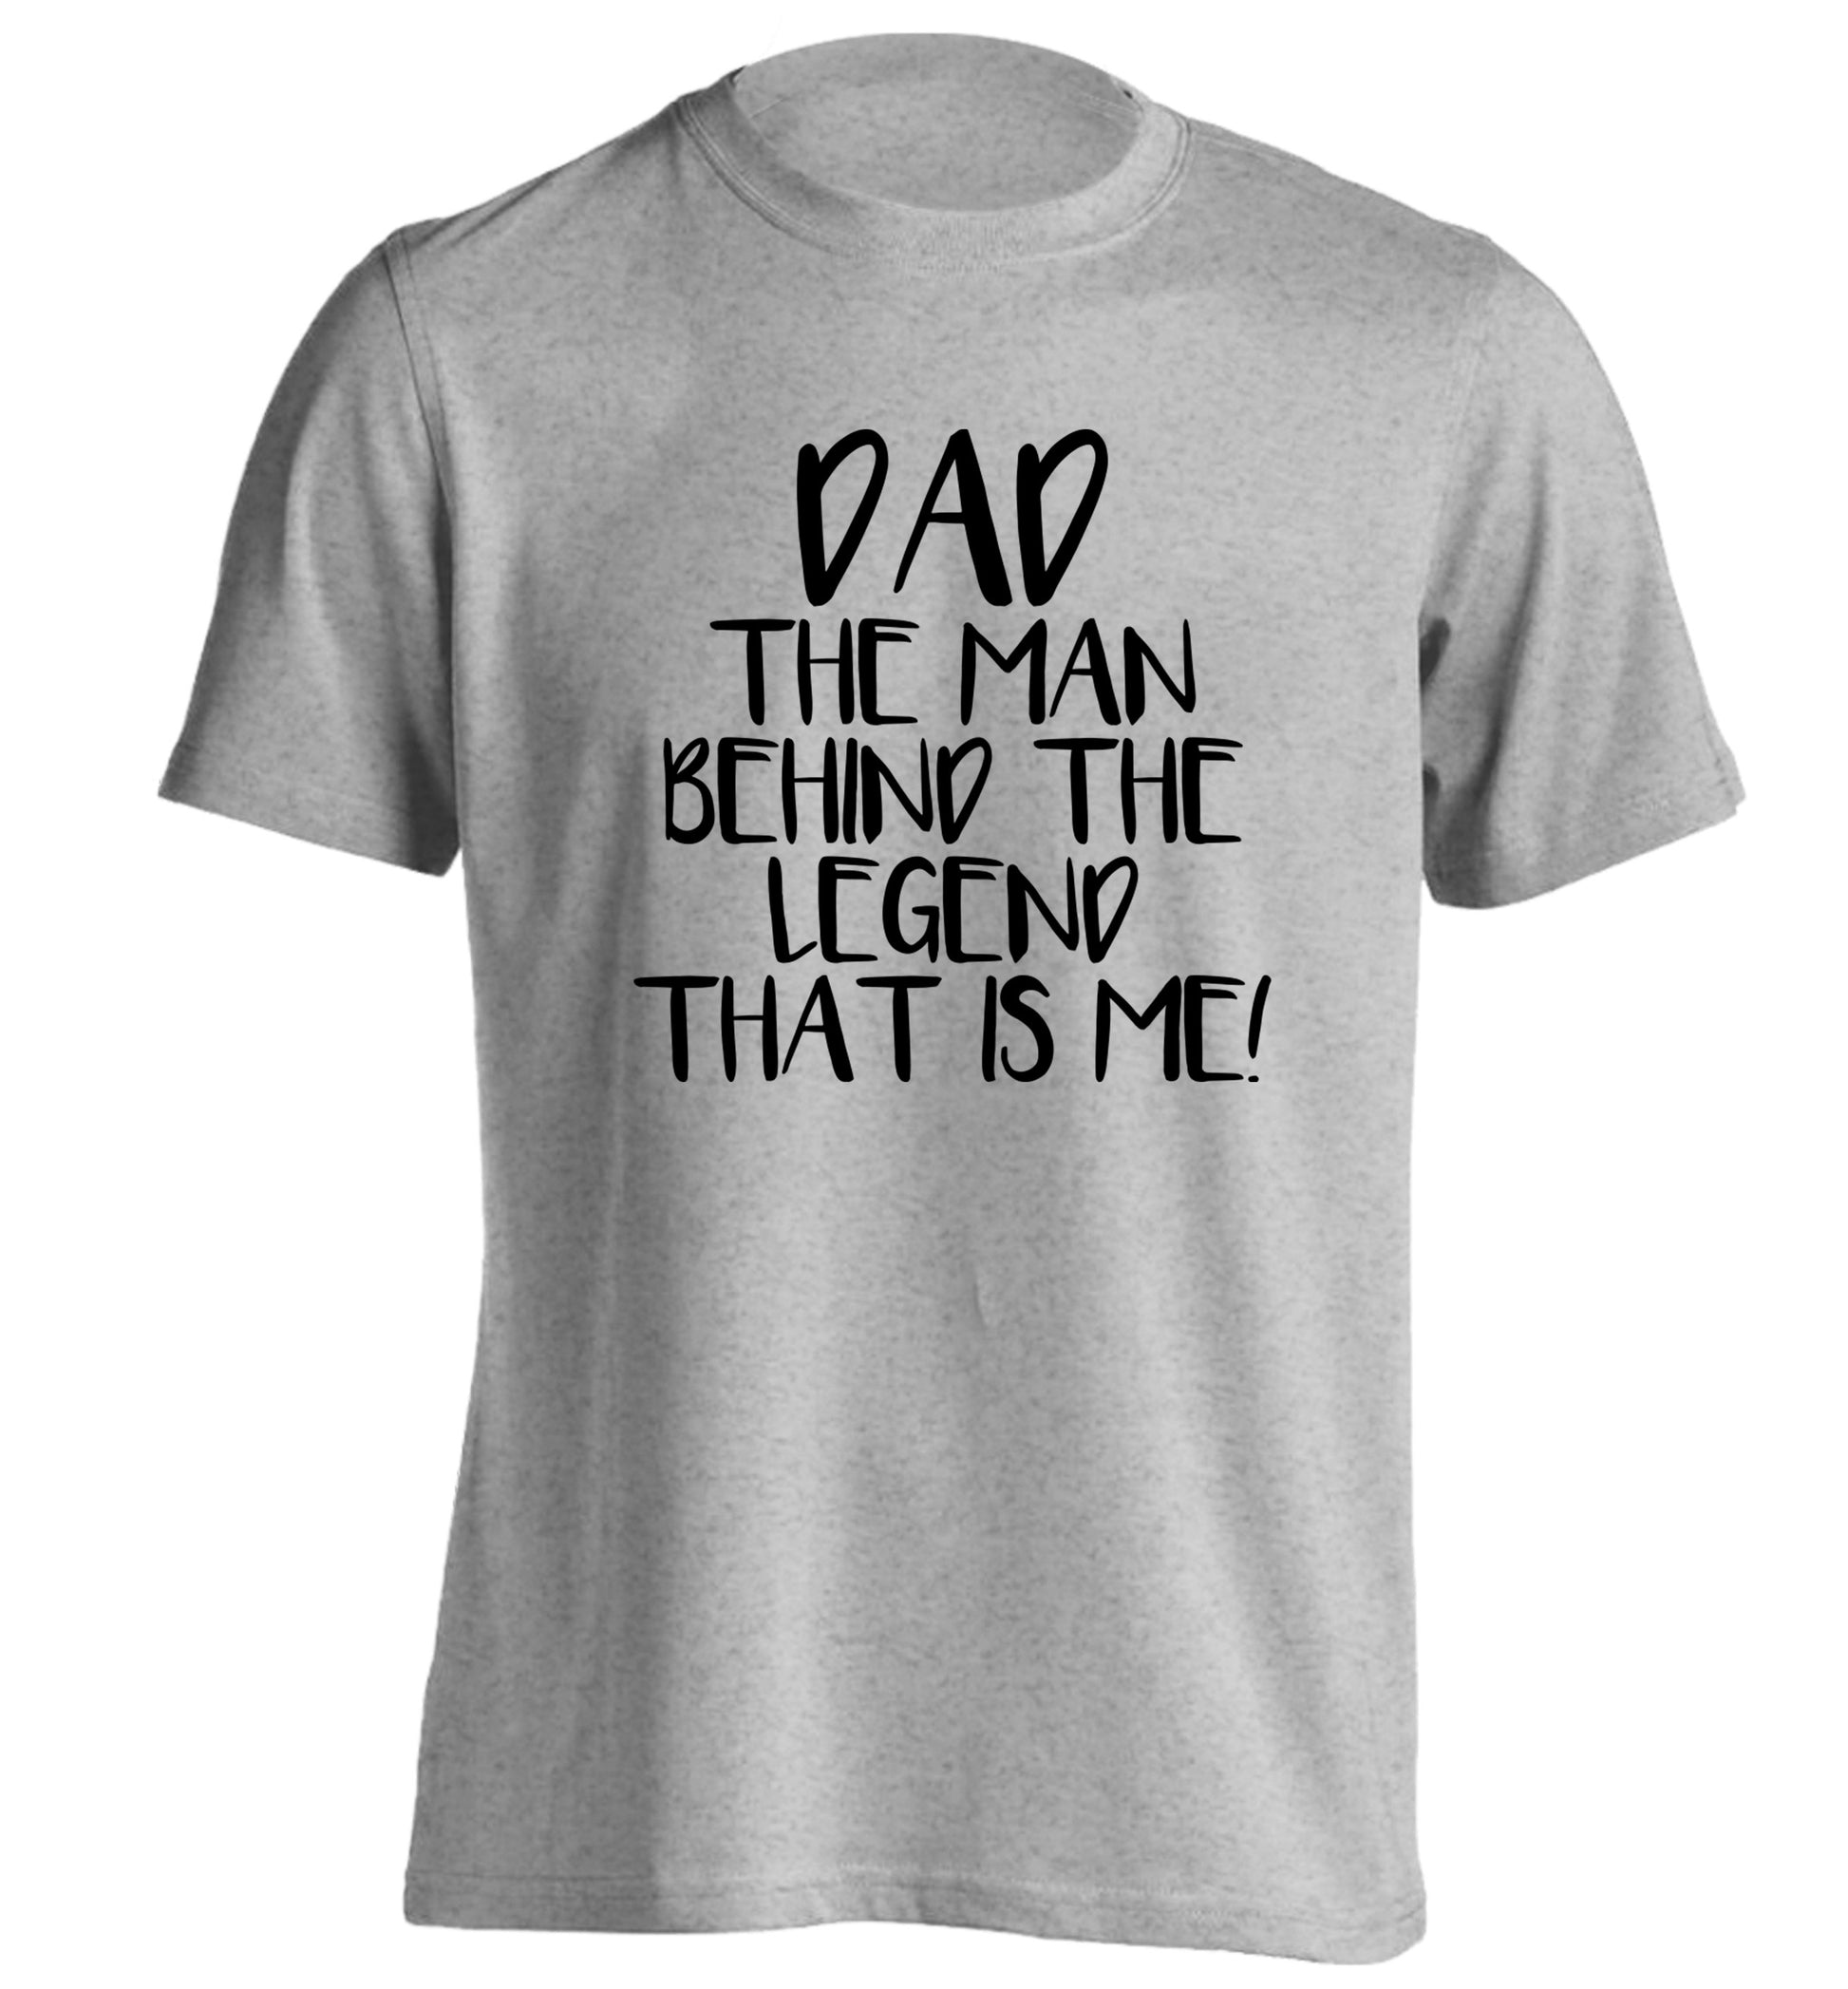 Dad the man behind the legend that is me! adults unisex grey Tshirt 2XL